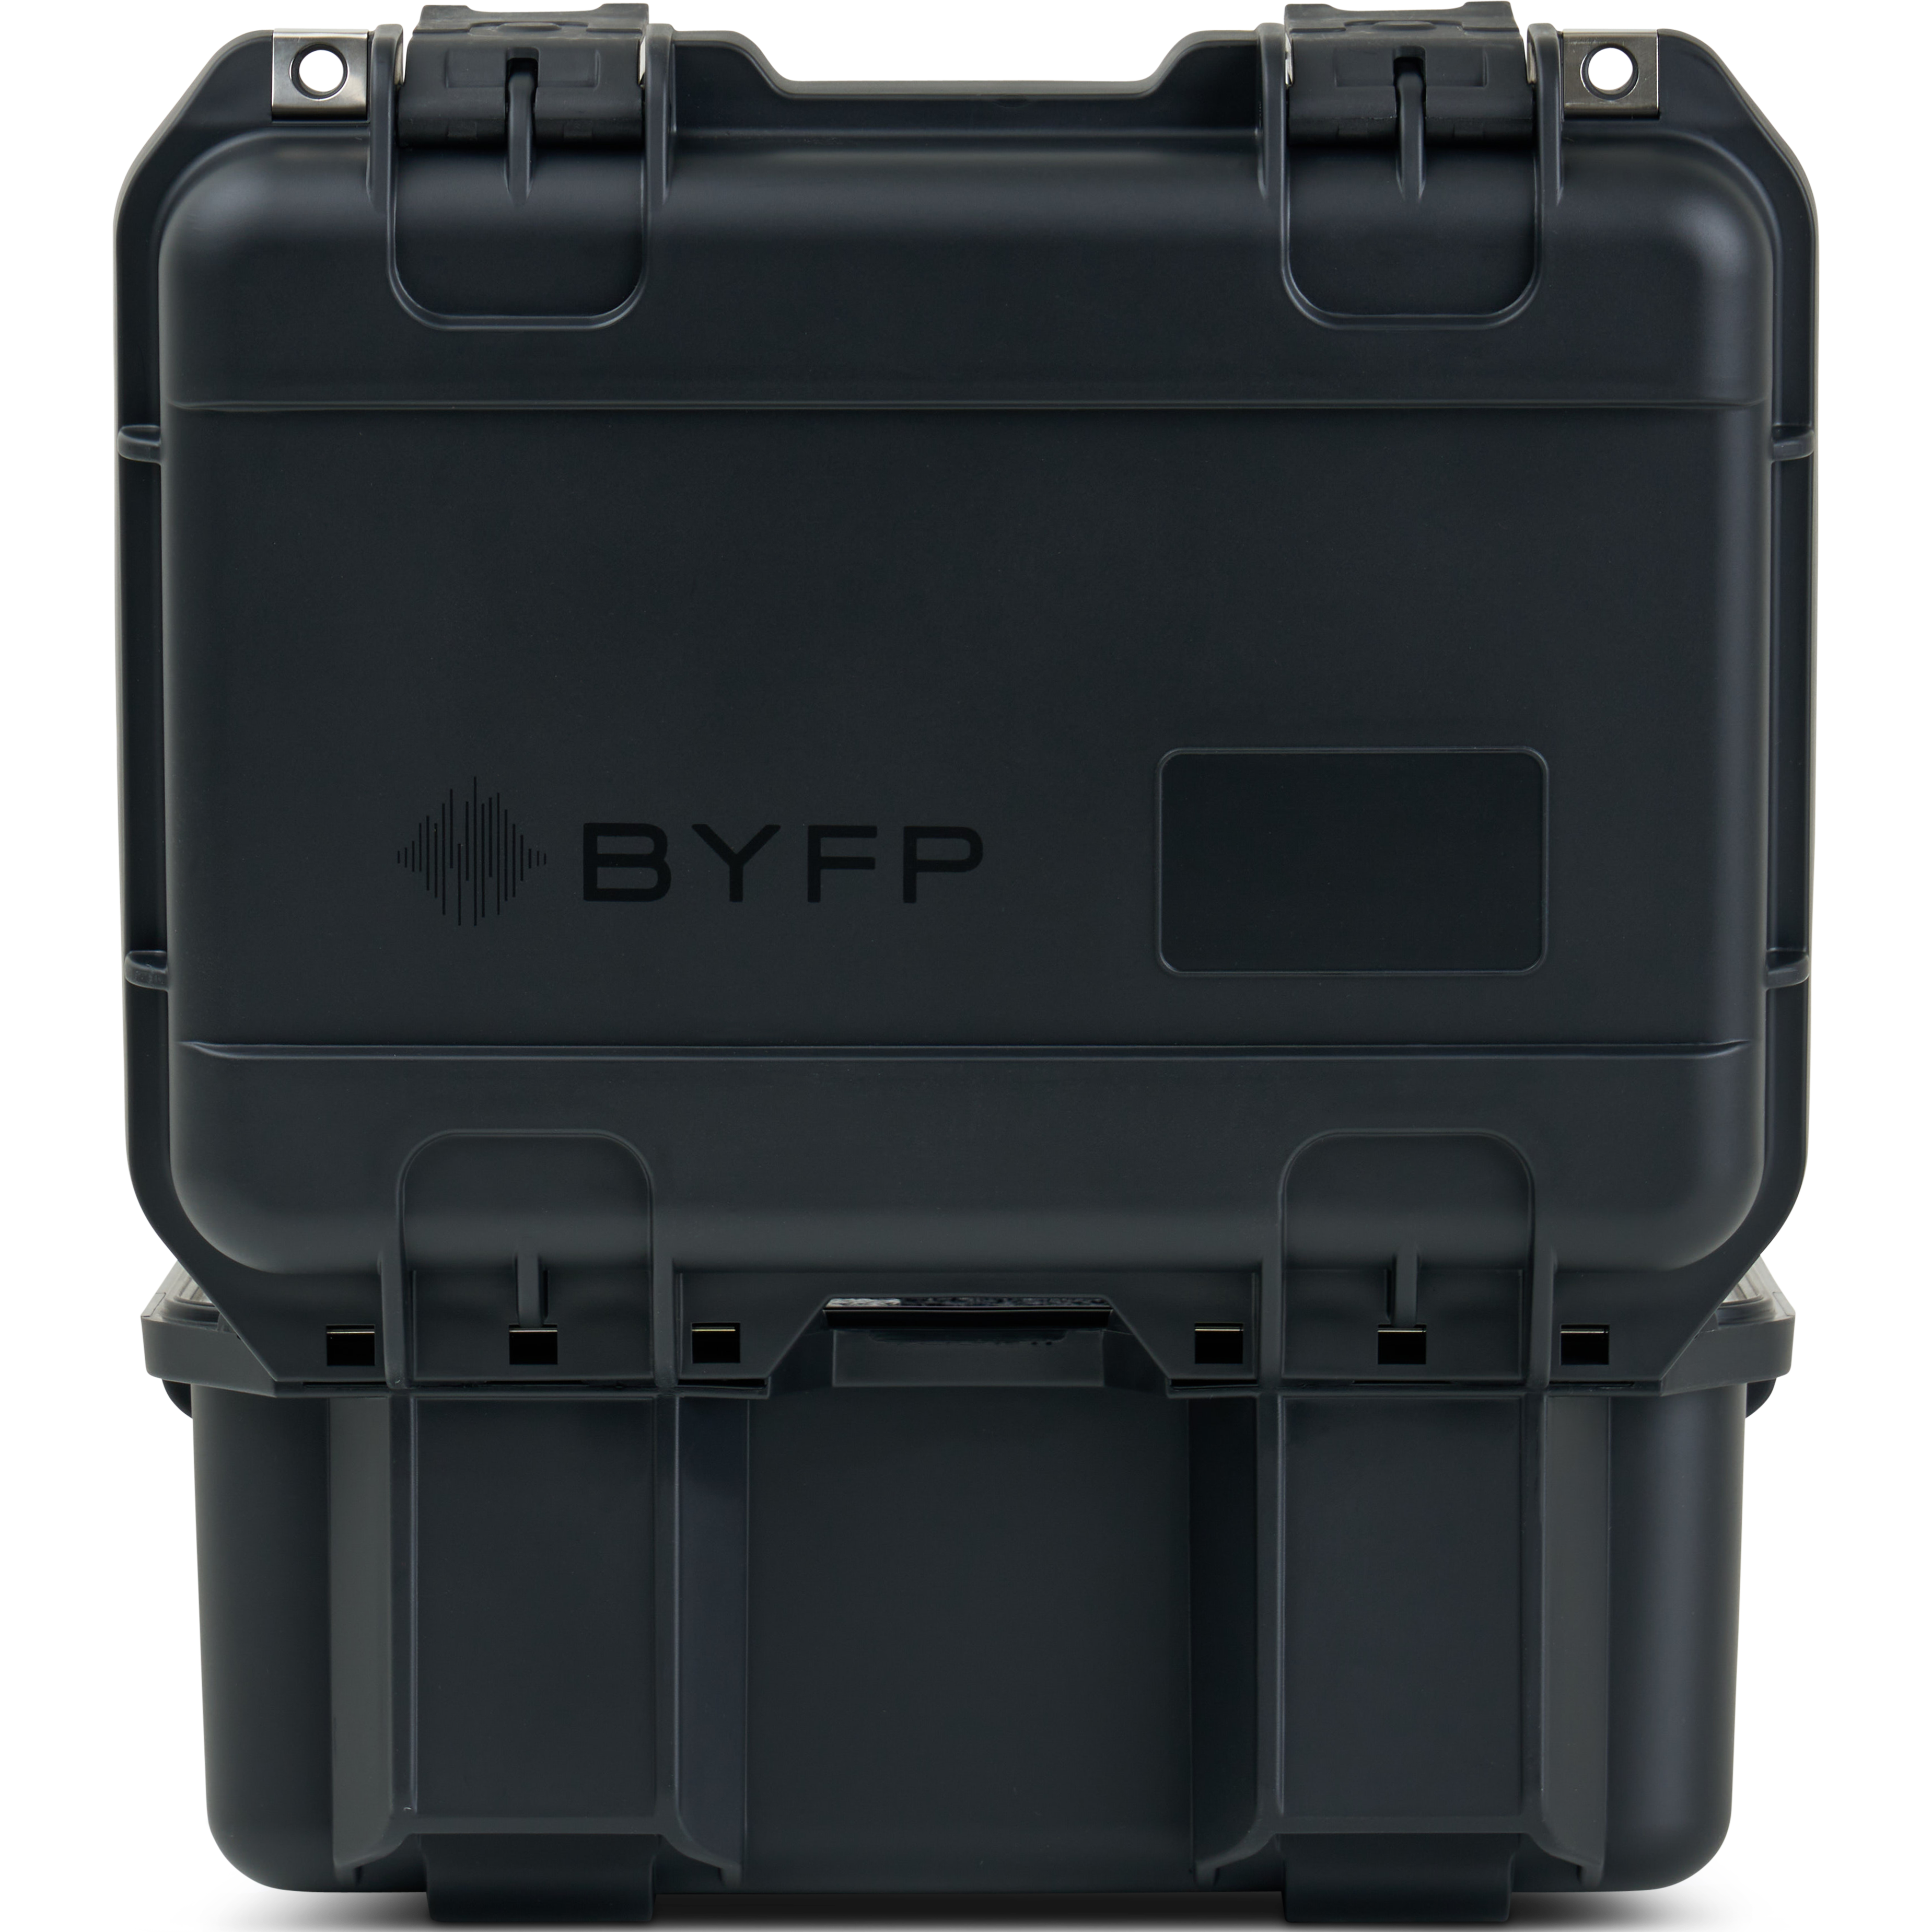 BYFP ipCase for ChamSys SnakeSys B4